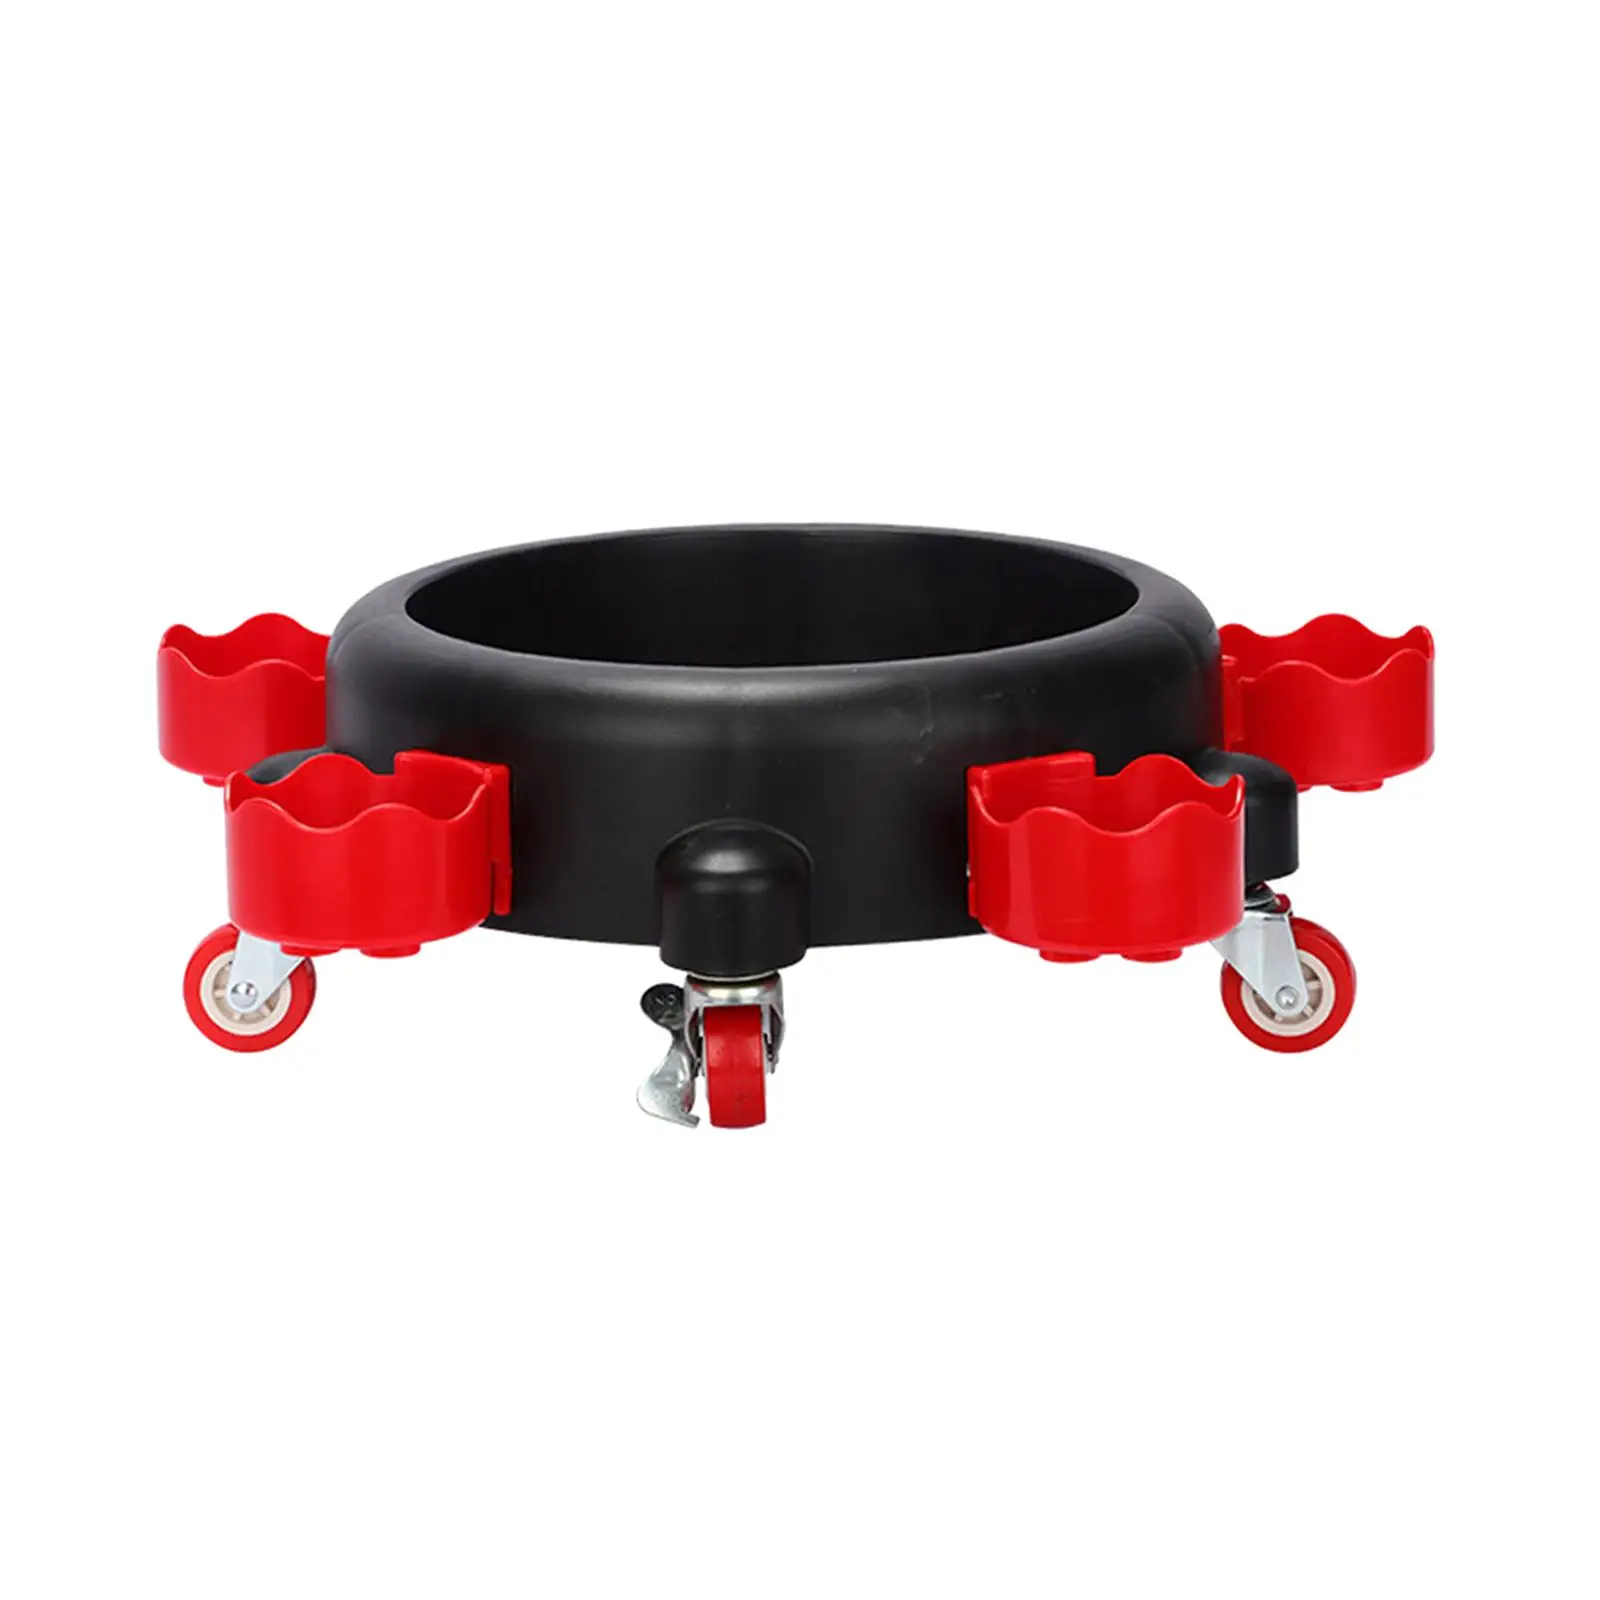 Bucket Dolly Withrolling Swivel Casters Moving Base Car Wash Stool for Painting Assistance Car Washing Car Beauty Cleaners